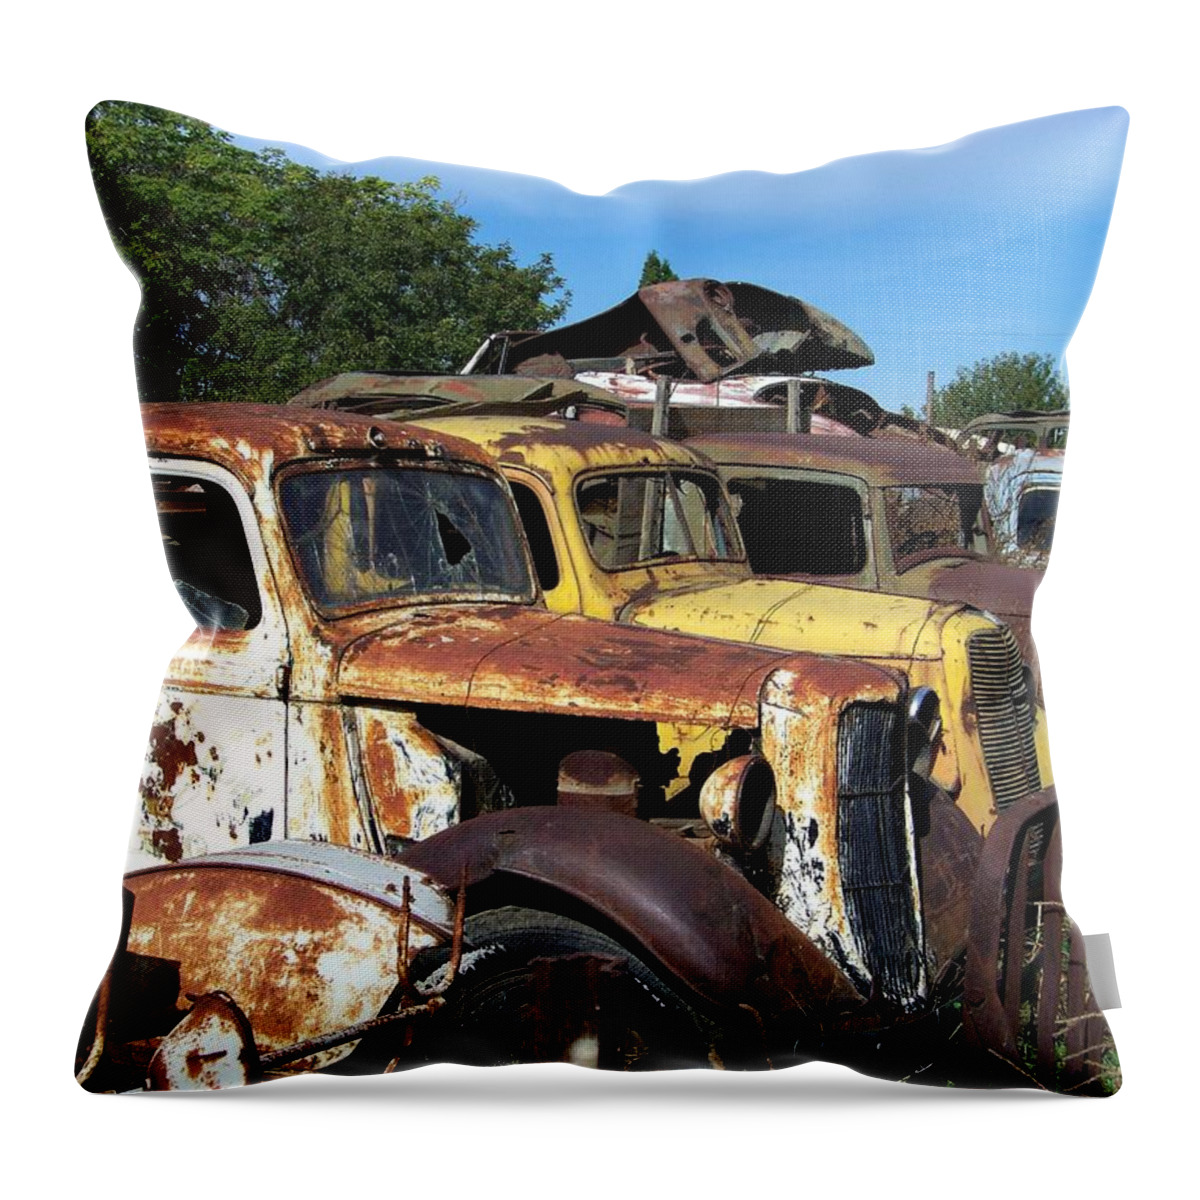 Used Trucks Throw Pillow featuring the photograph Trucks by Charles Robinson